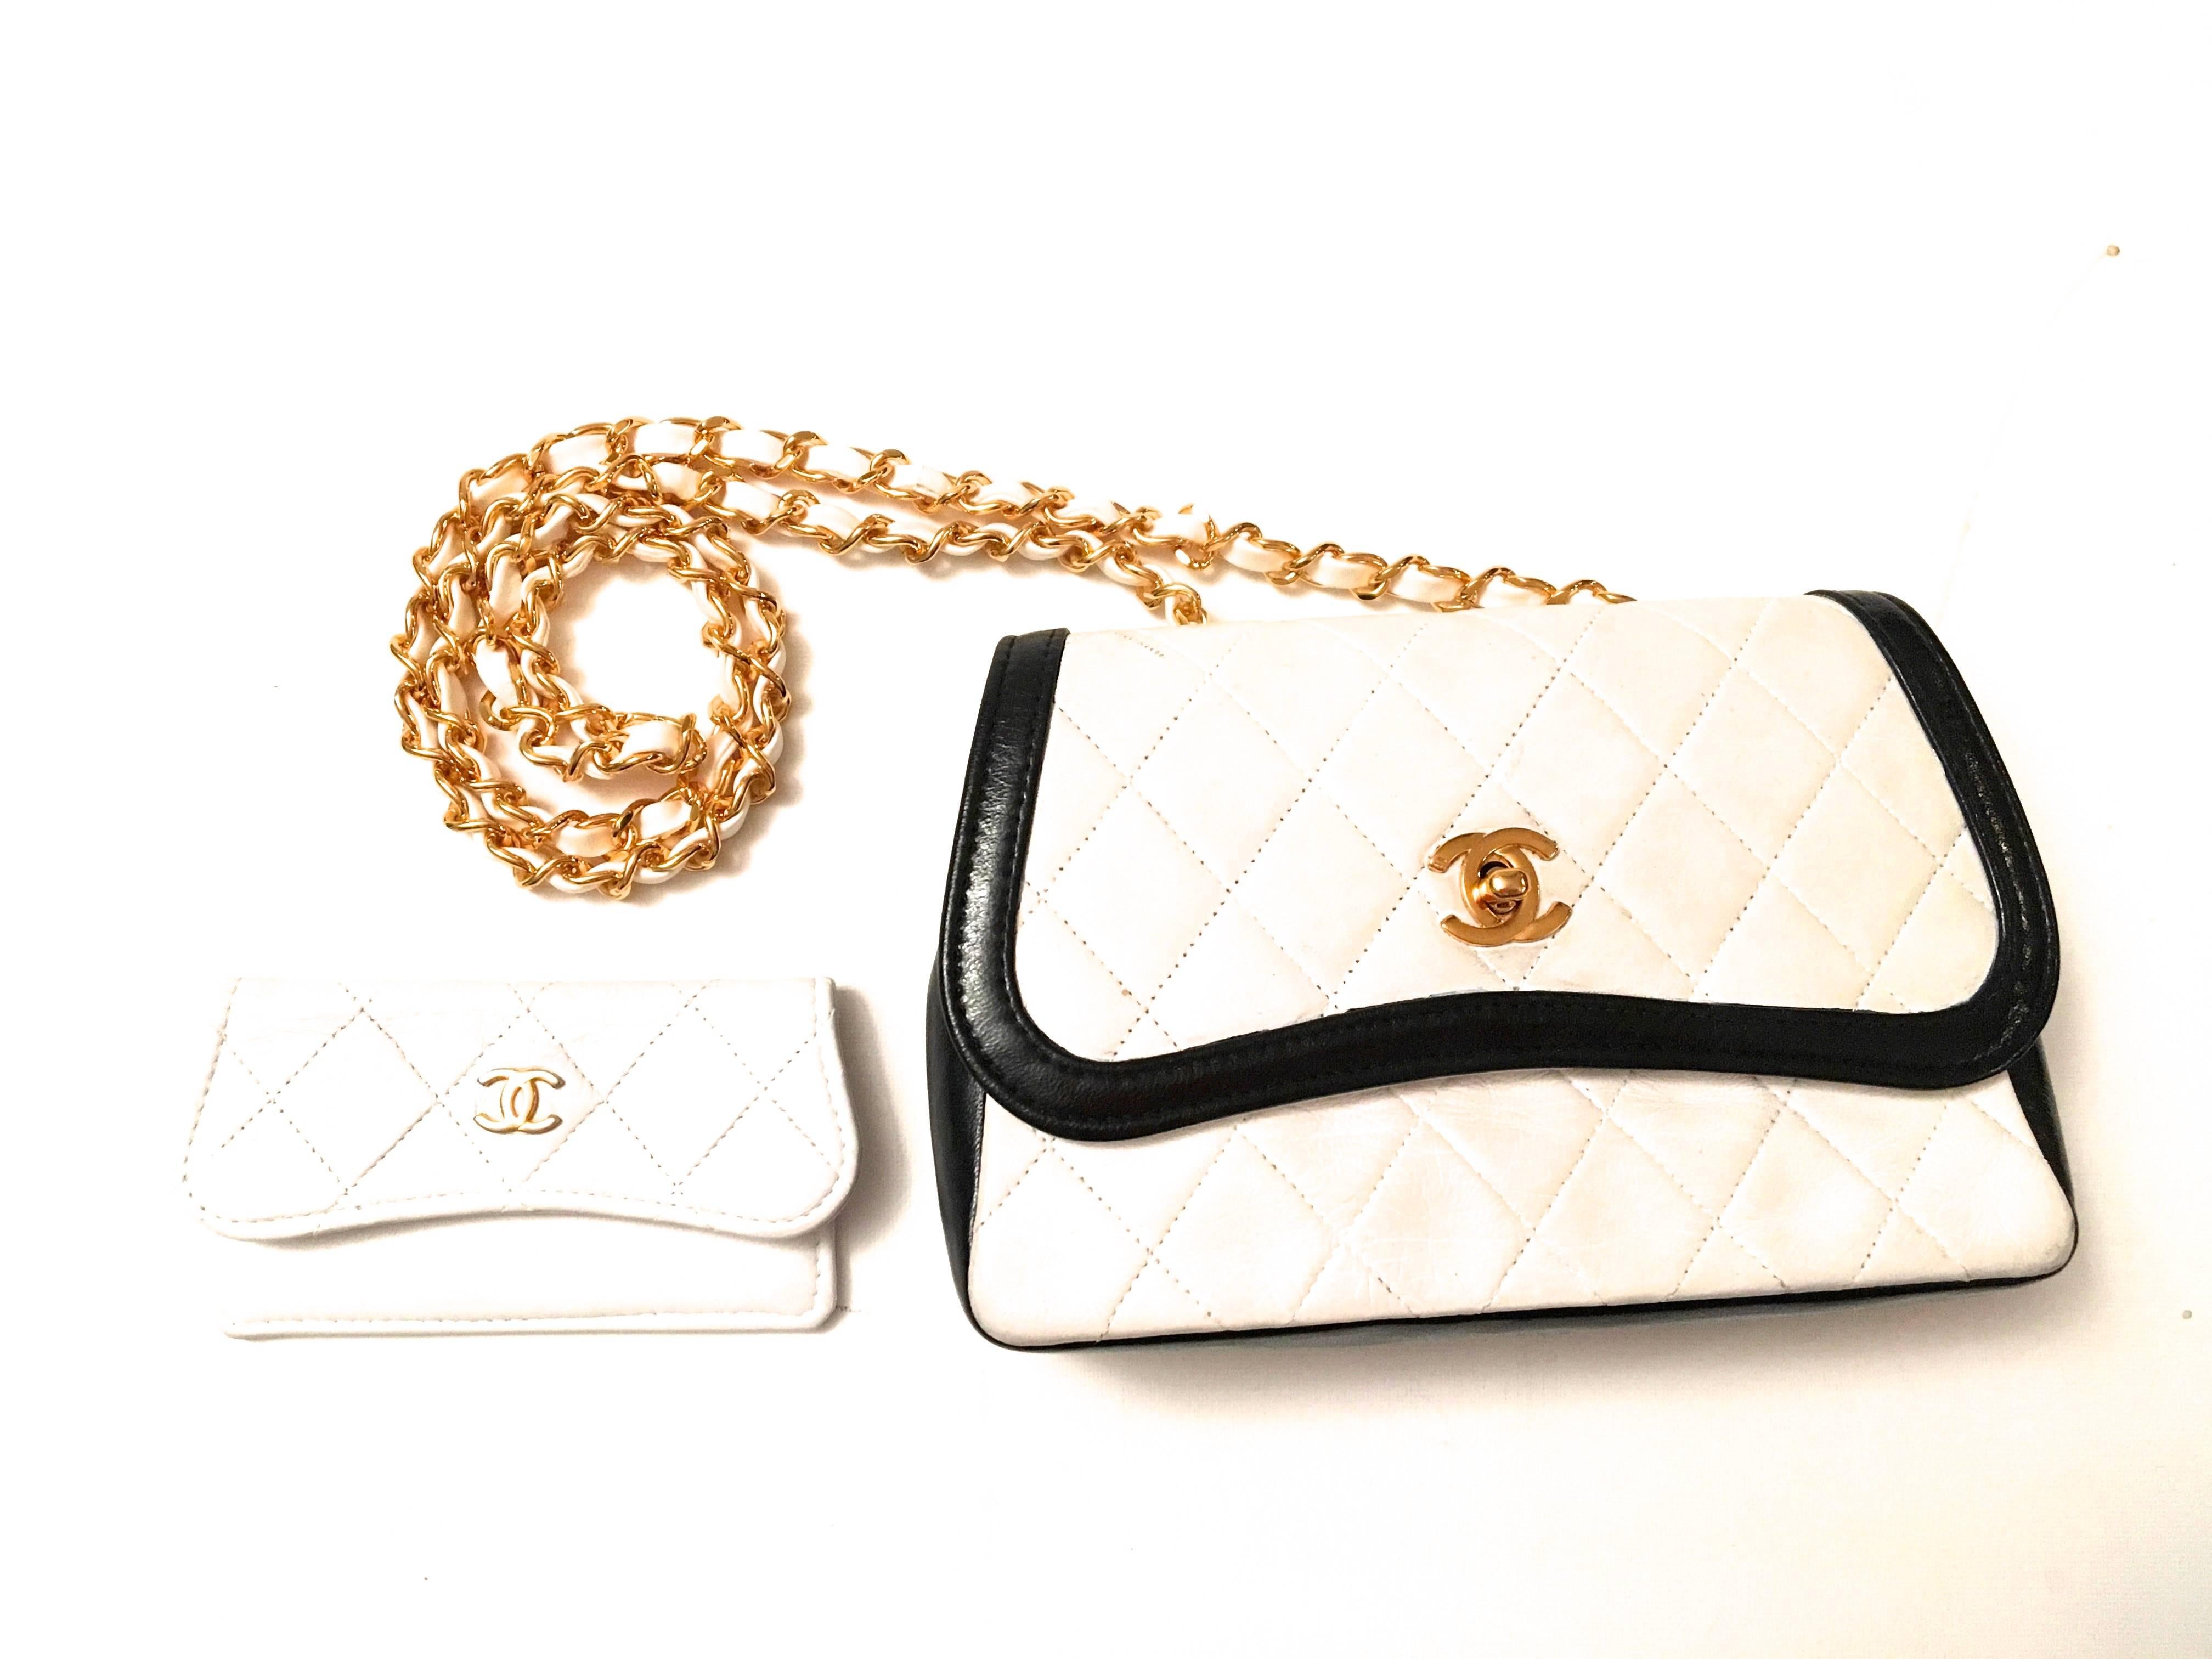 Presented here is a beautiful black and white crossbody bag from Chanel. The purse is from the late 80's early 90's. The bag is constructed with a beautiful classic white leather on the front, top and exterior. The bag is trimmed in black leather